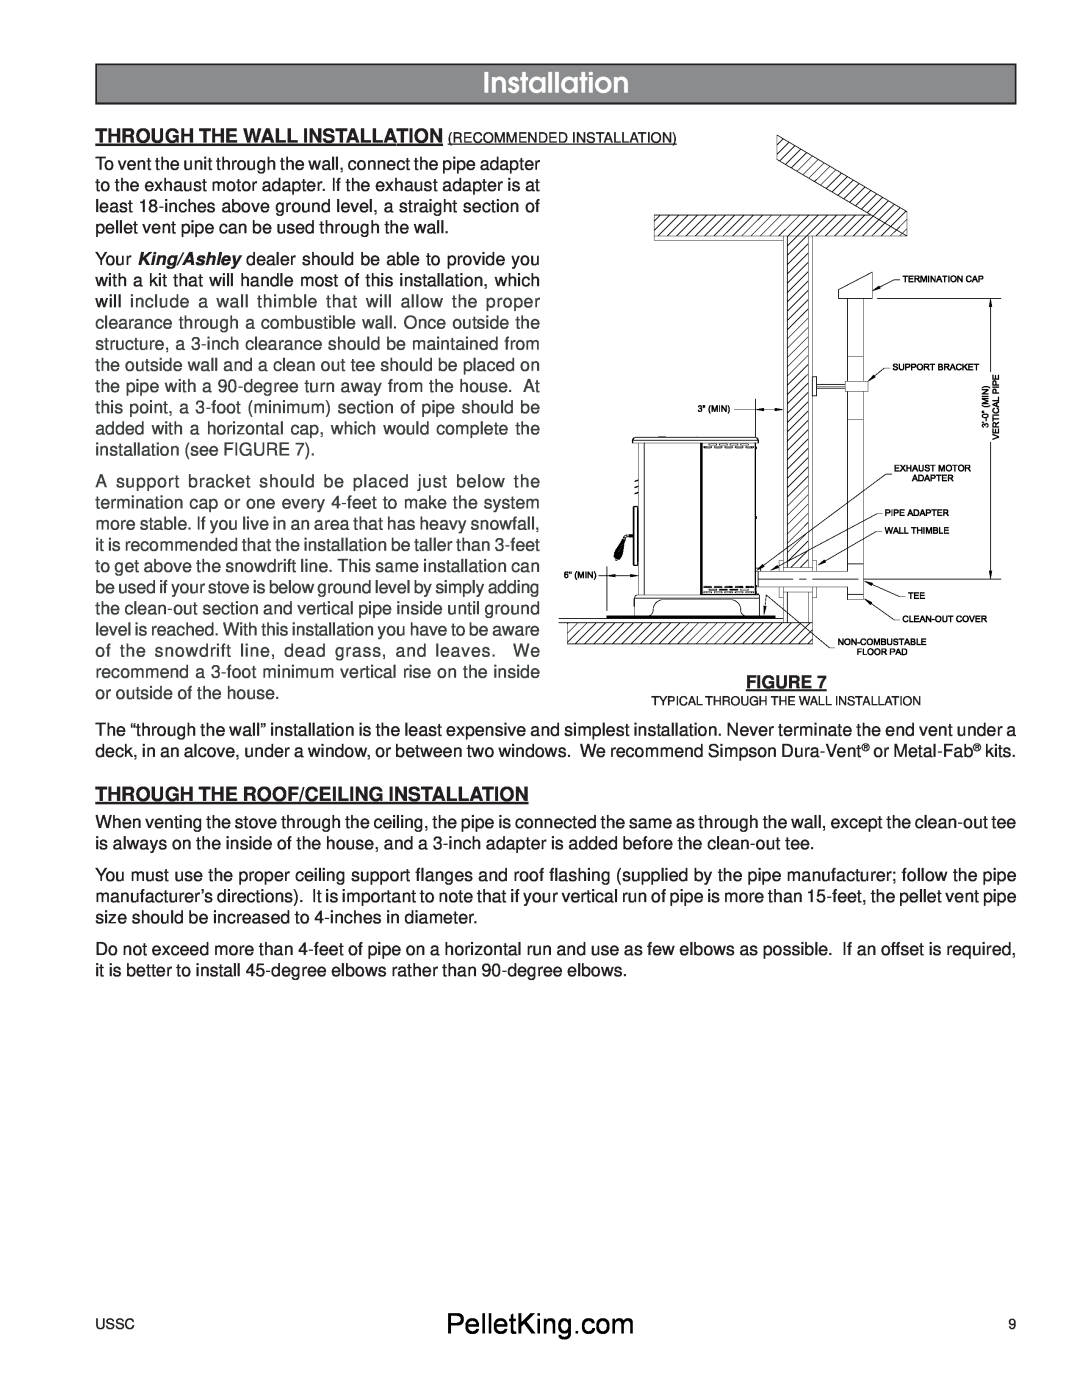 United States Stove 5500/5500XL owner manual Through The Roof/Ceiling Installation 